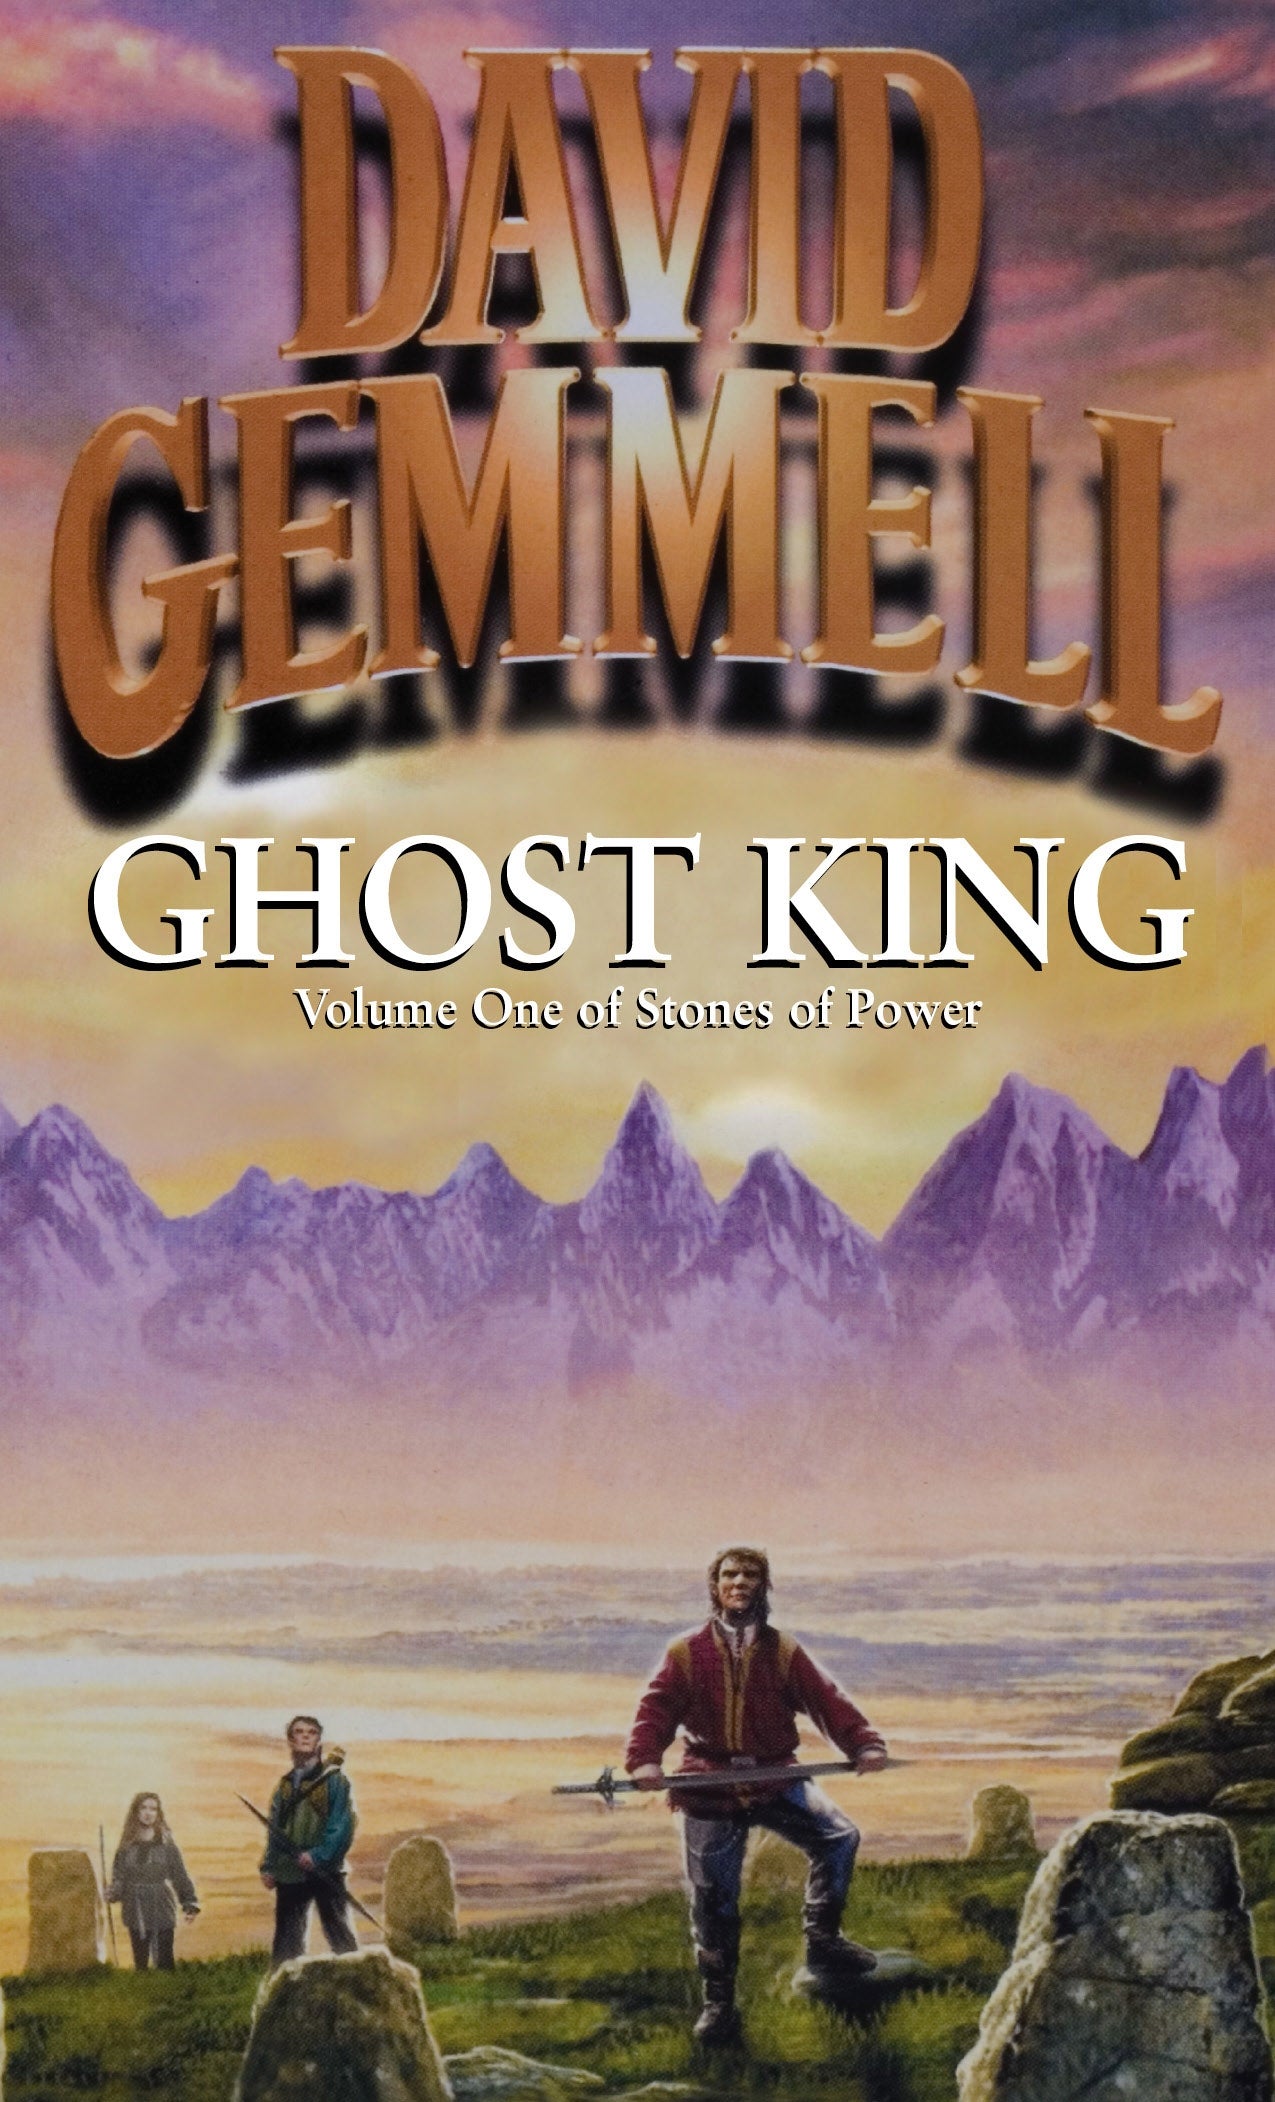 Ghost King by David Gemmell